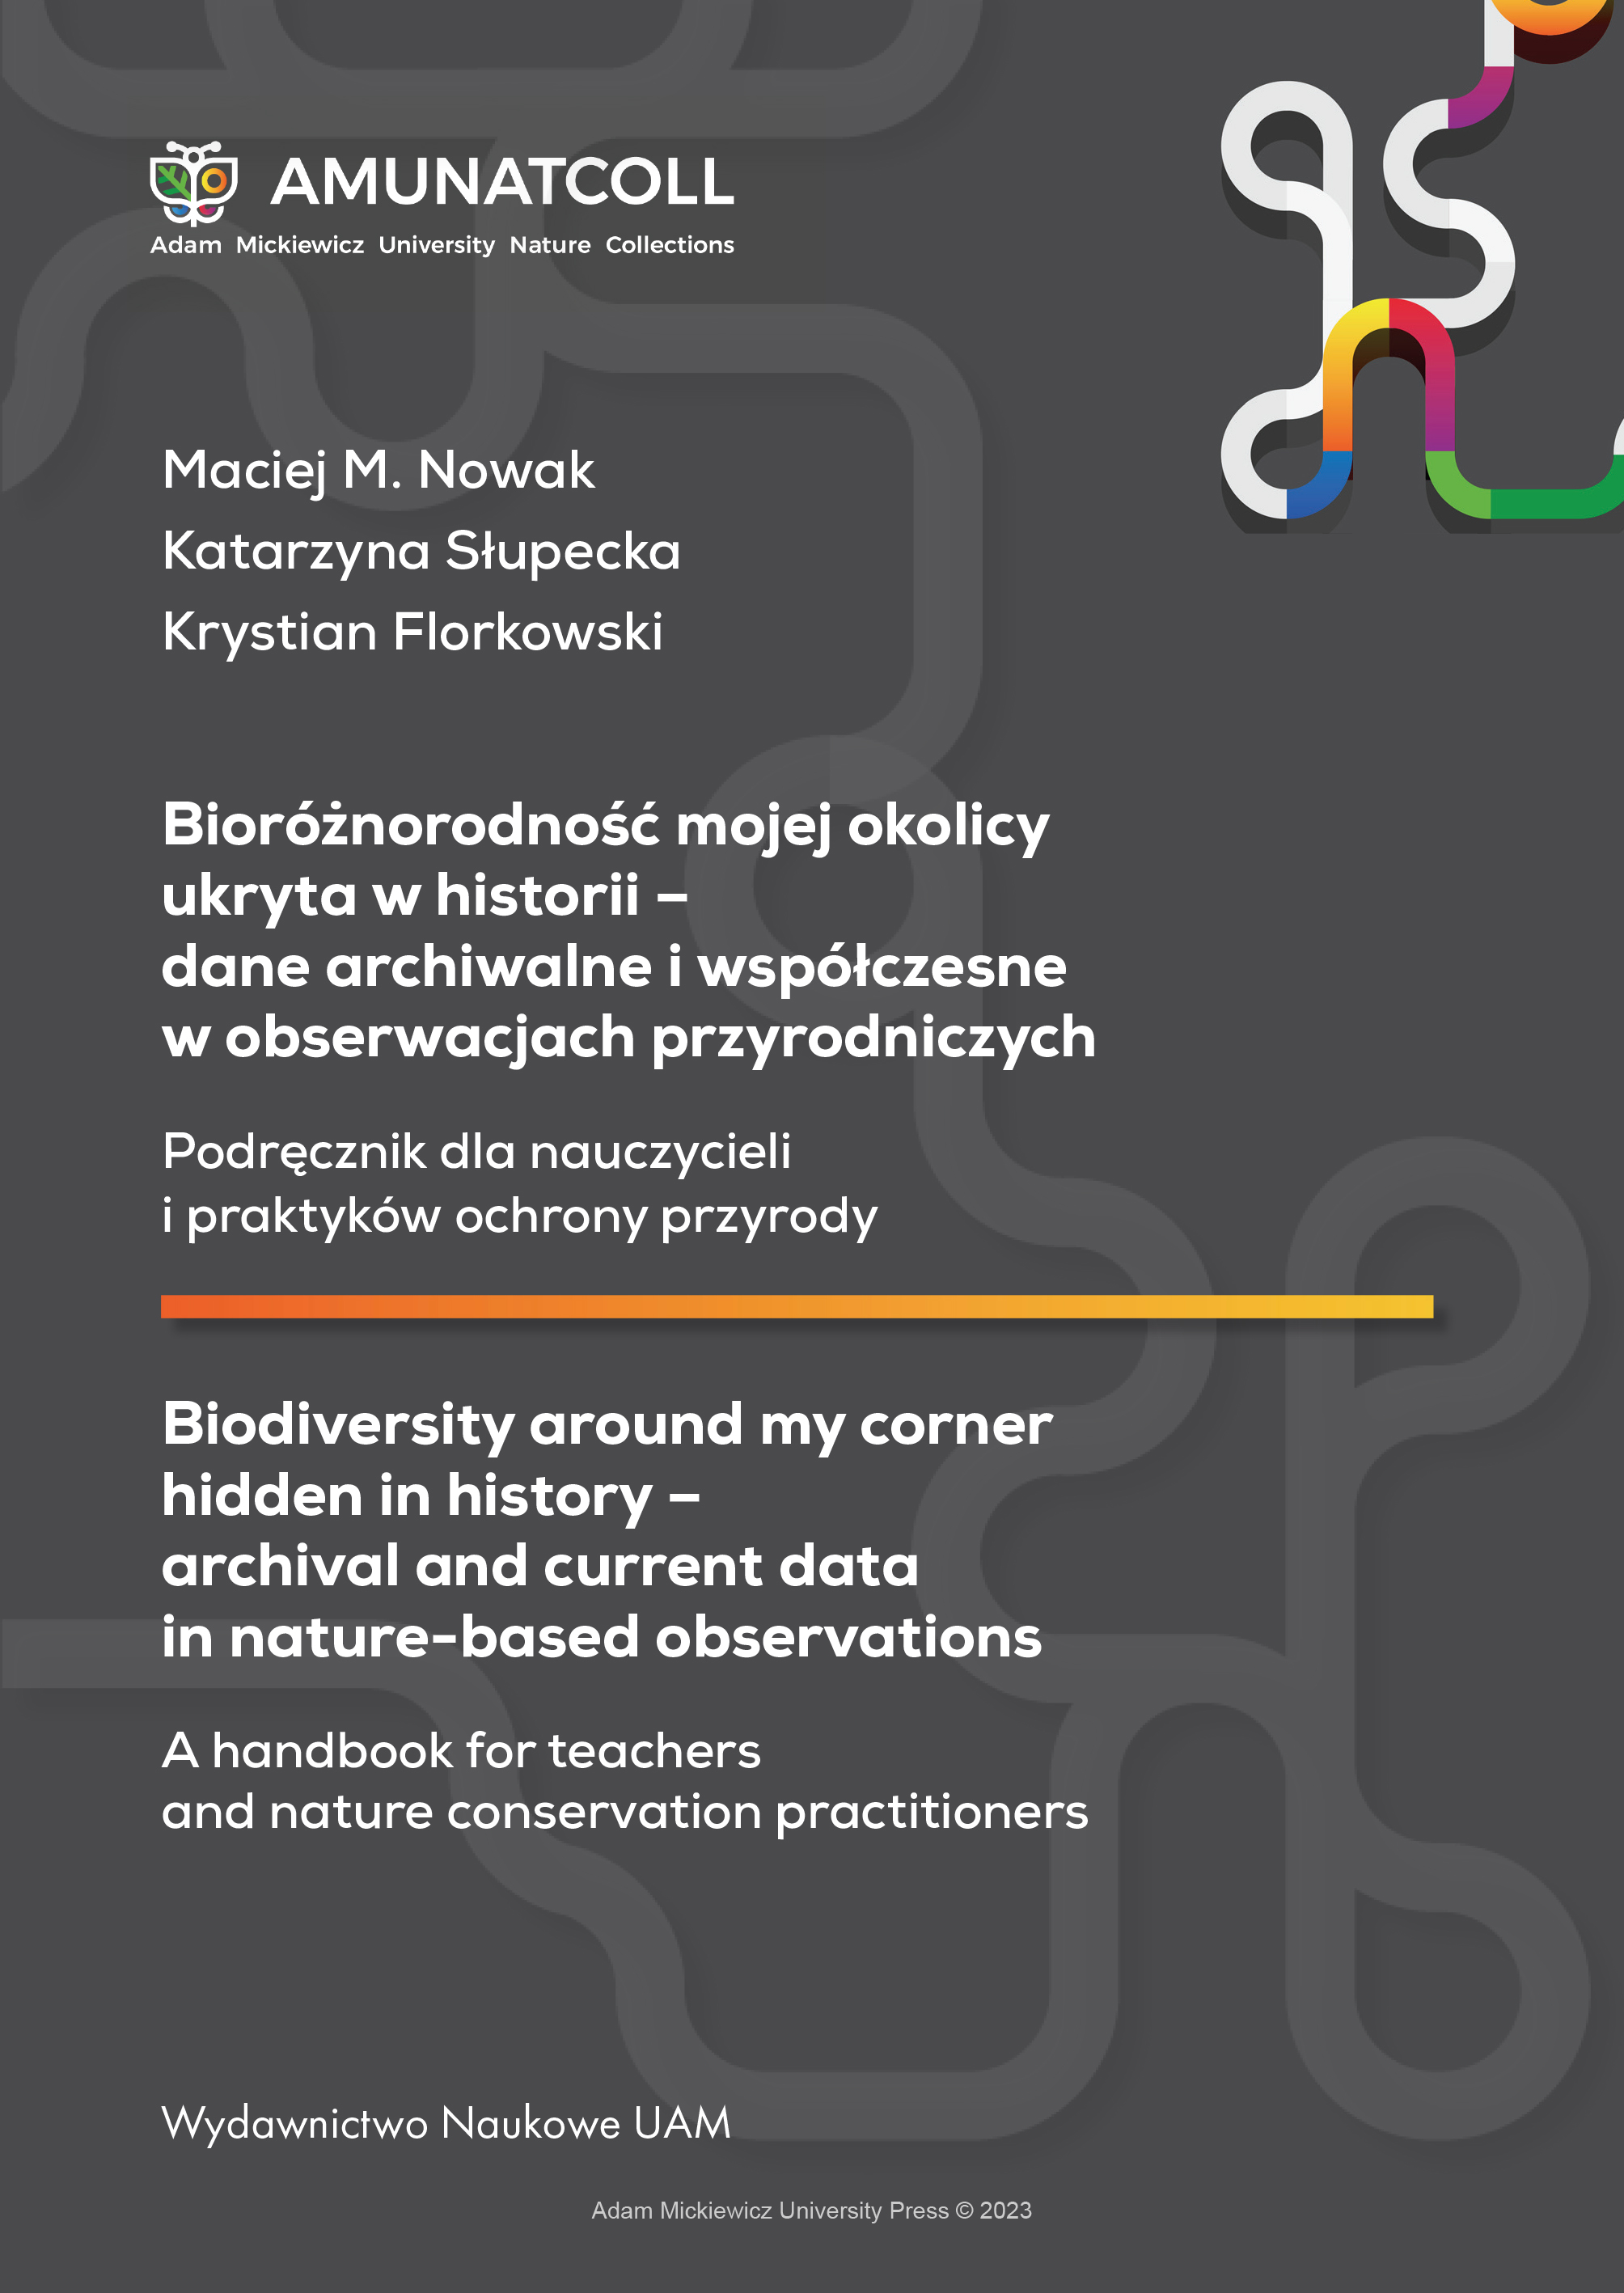 Biodiversity around my corner hidden in history – archival and current data in nature-based observations